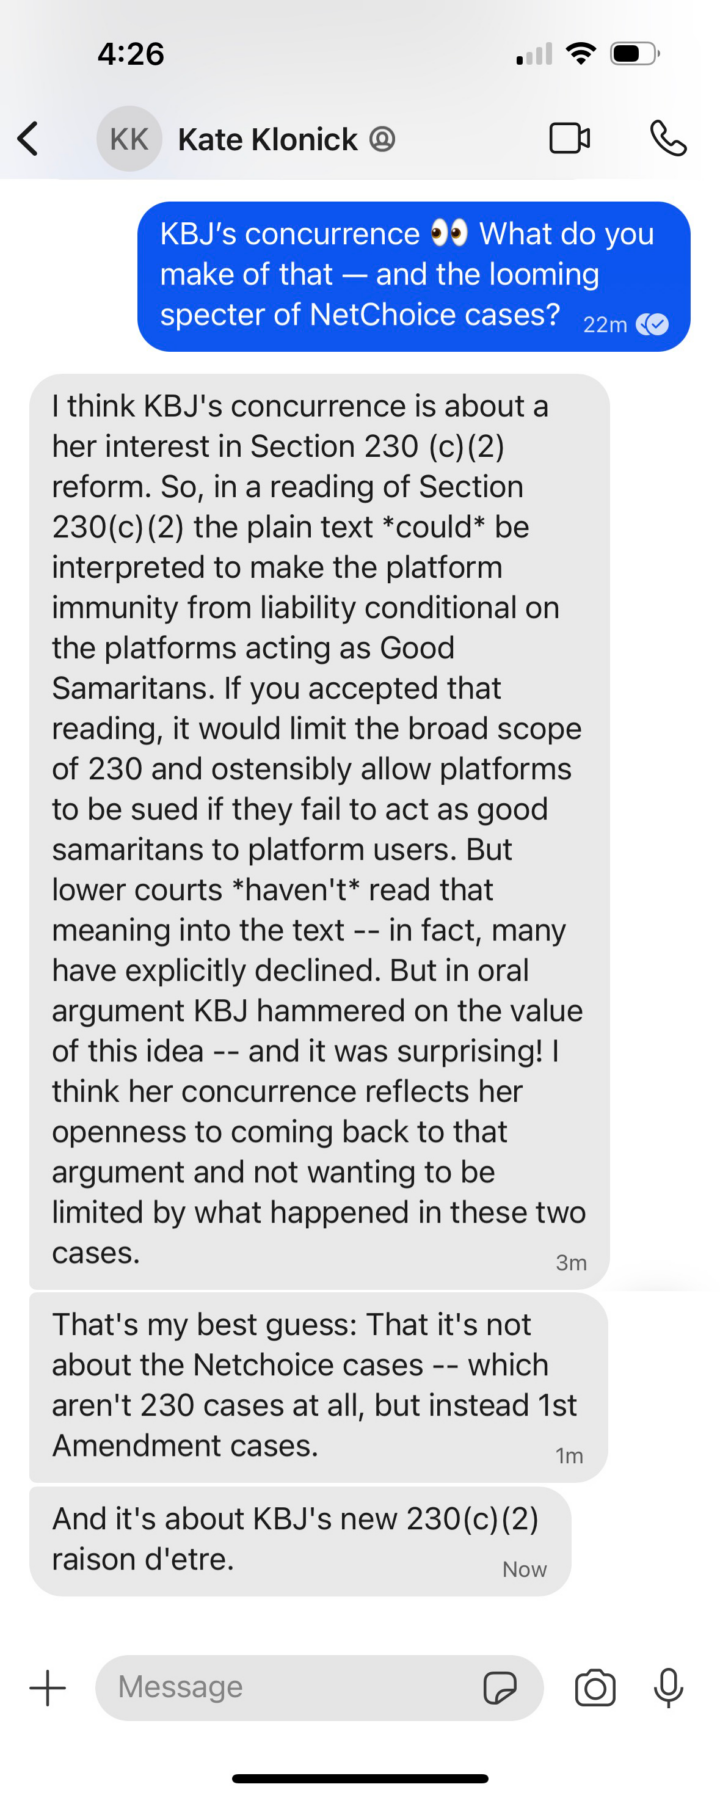 Screenshot of a Signal conversation with Kate Klonick, which reads in part: "I think KBJ's concurrence is about her interest in Section 230 (c)(2) reform. So, in a reading of Section 230(c)(2) the plain text *could* be interpreted to make the platform immunity from liability conditional on the platforms acting as Good Samritans. If you accepted that reading, it would limit the broad scope of 230 and ostensibly allow platforms to be sued if they fail to act as good samaritans to platform users. But lower courts *haven't* read that meaning into the text. … In oral argument, KBJ hammered on the value of this idea… I think her concurrence reflects her openness to coming back to that argument."